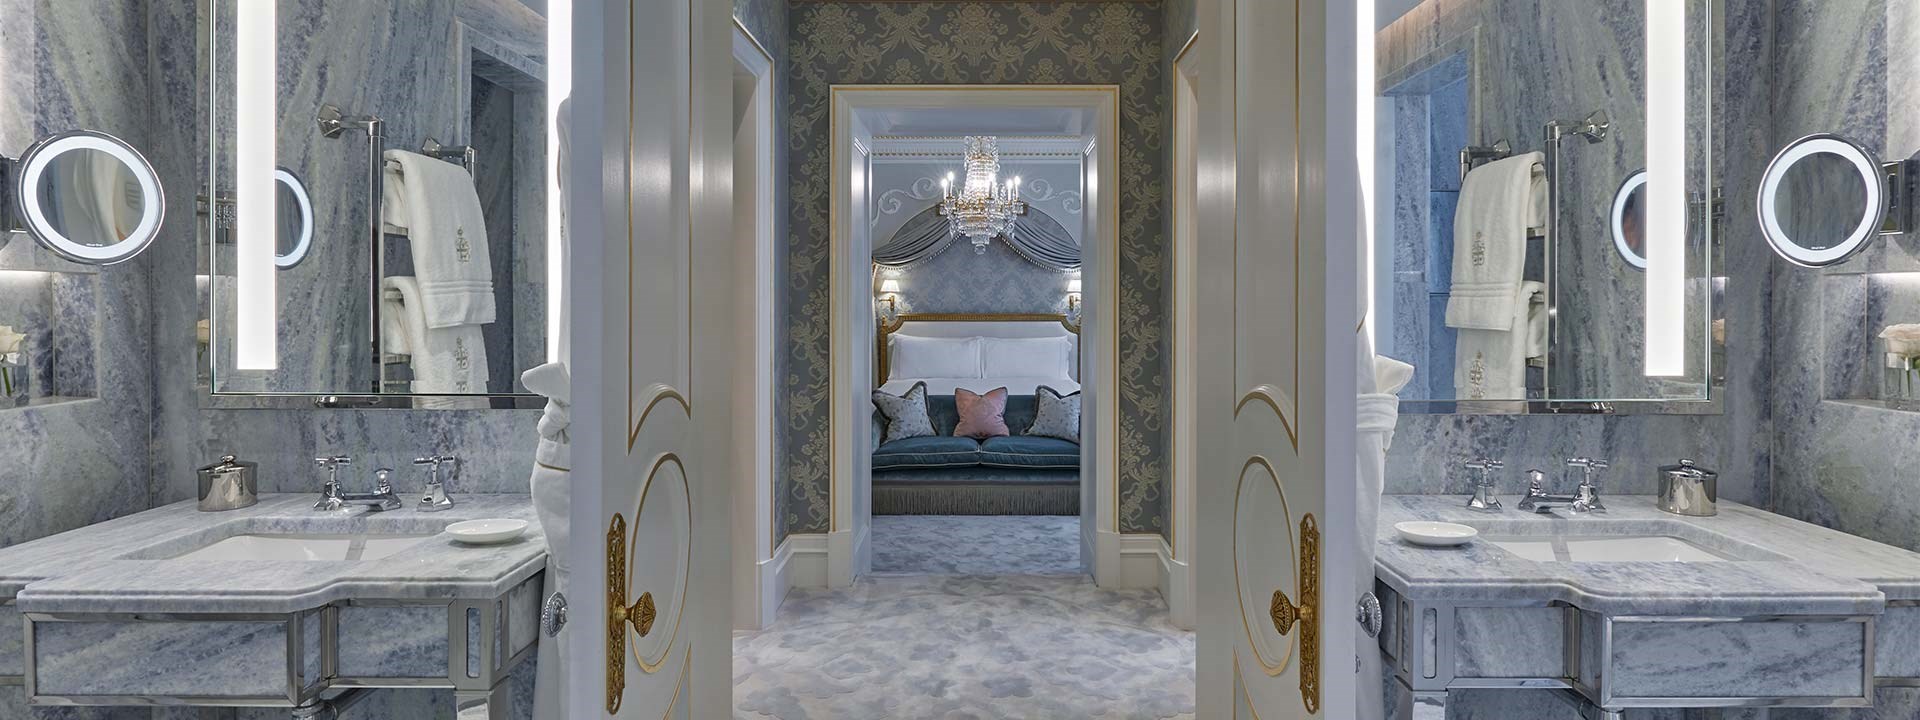 Royal Suite at Claridge's - bathroom view with marble bathtubs, marble walls and view to the bedroom.